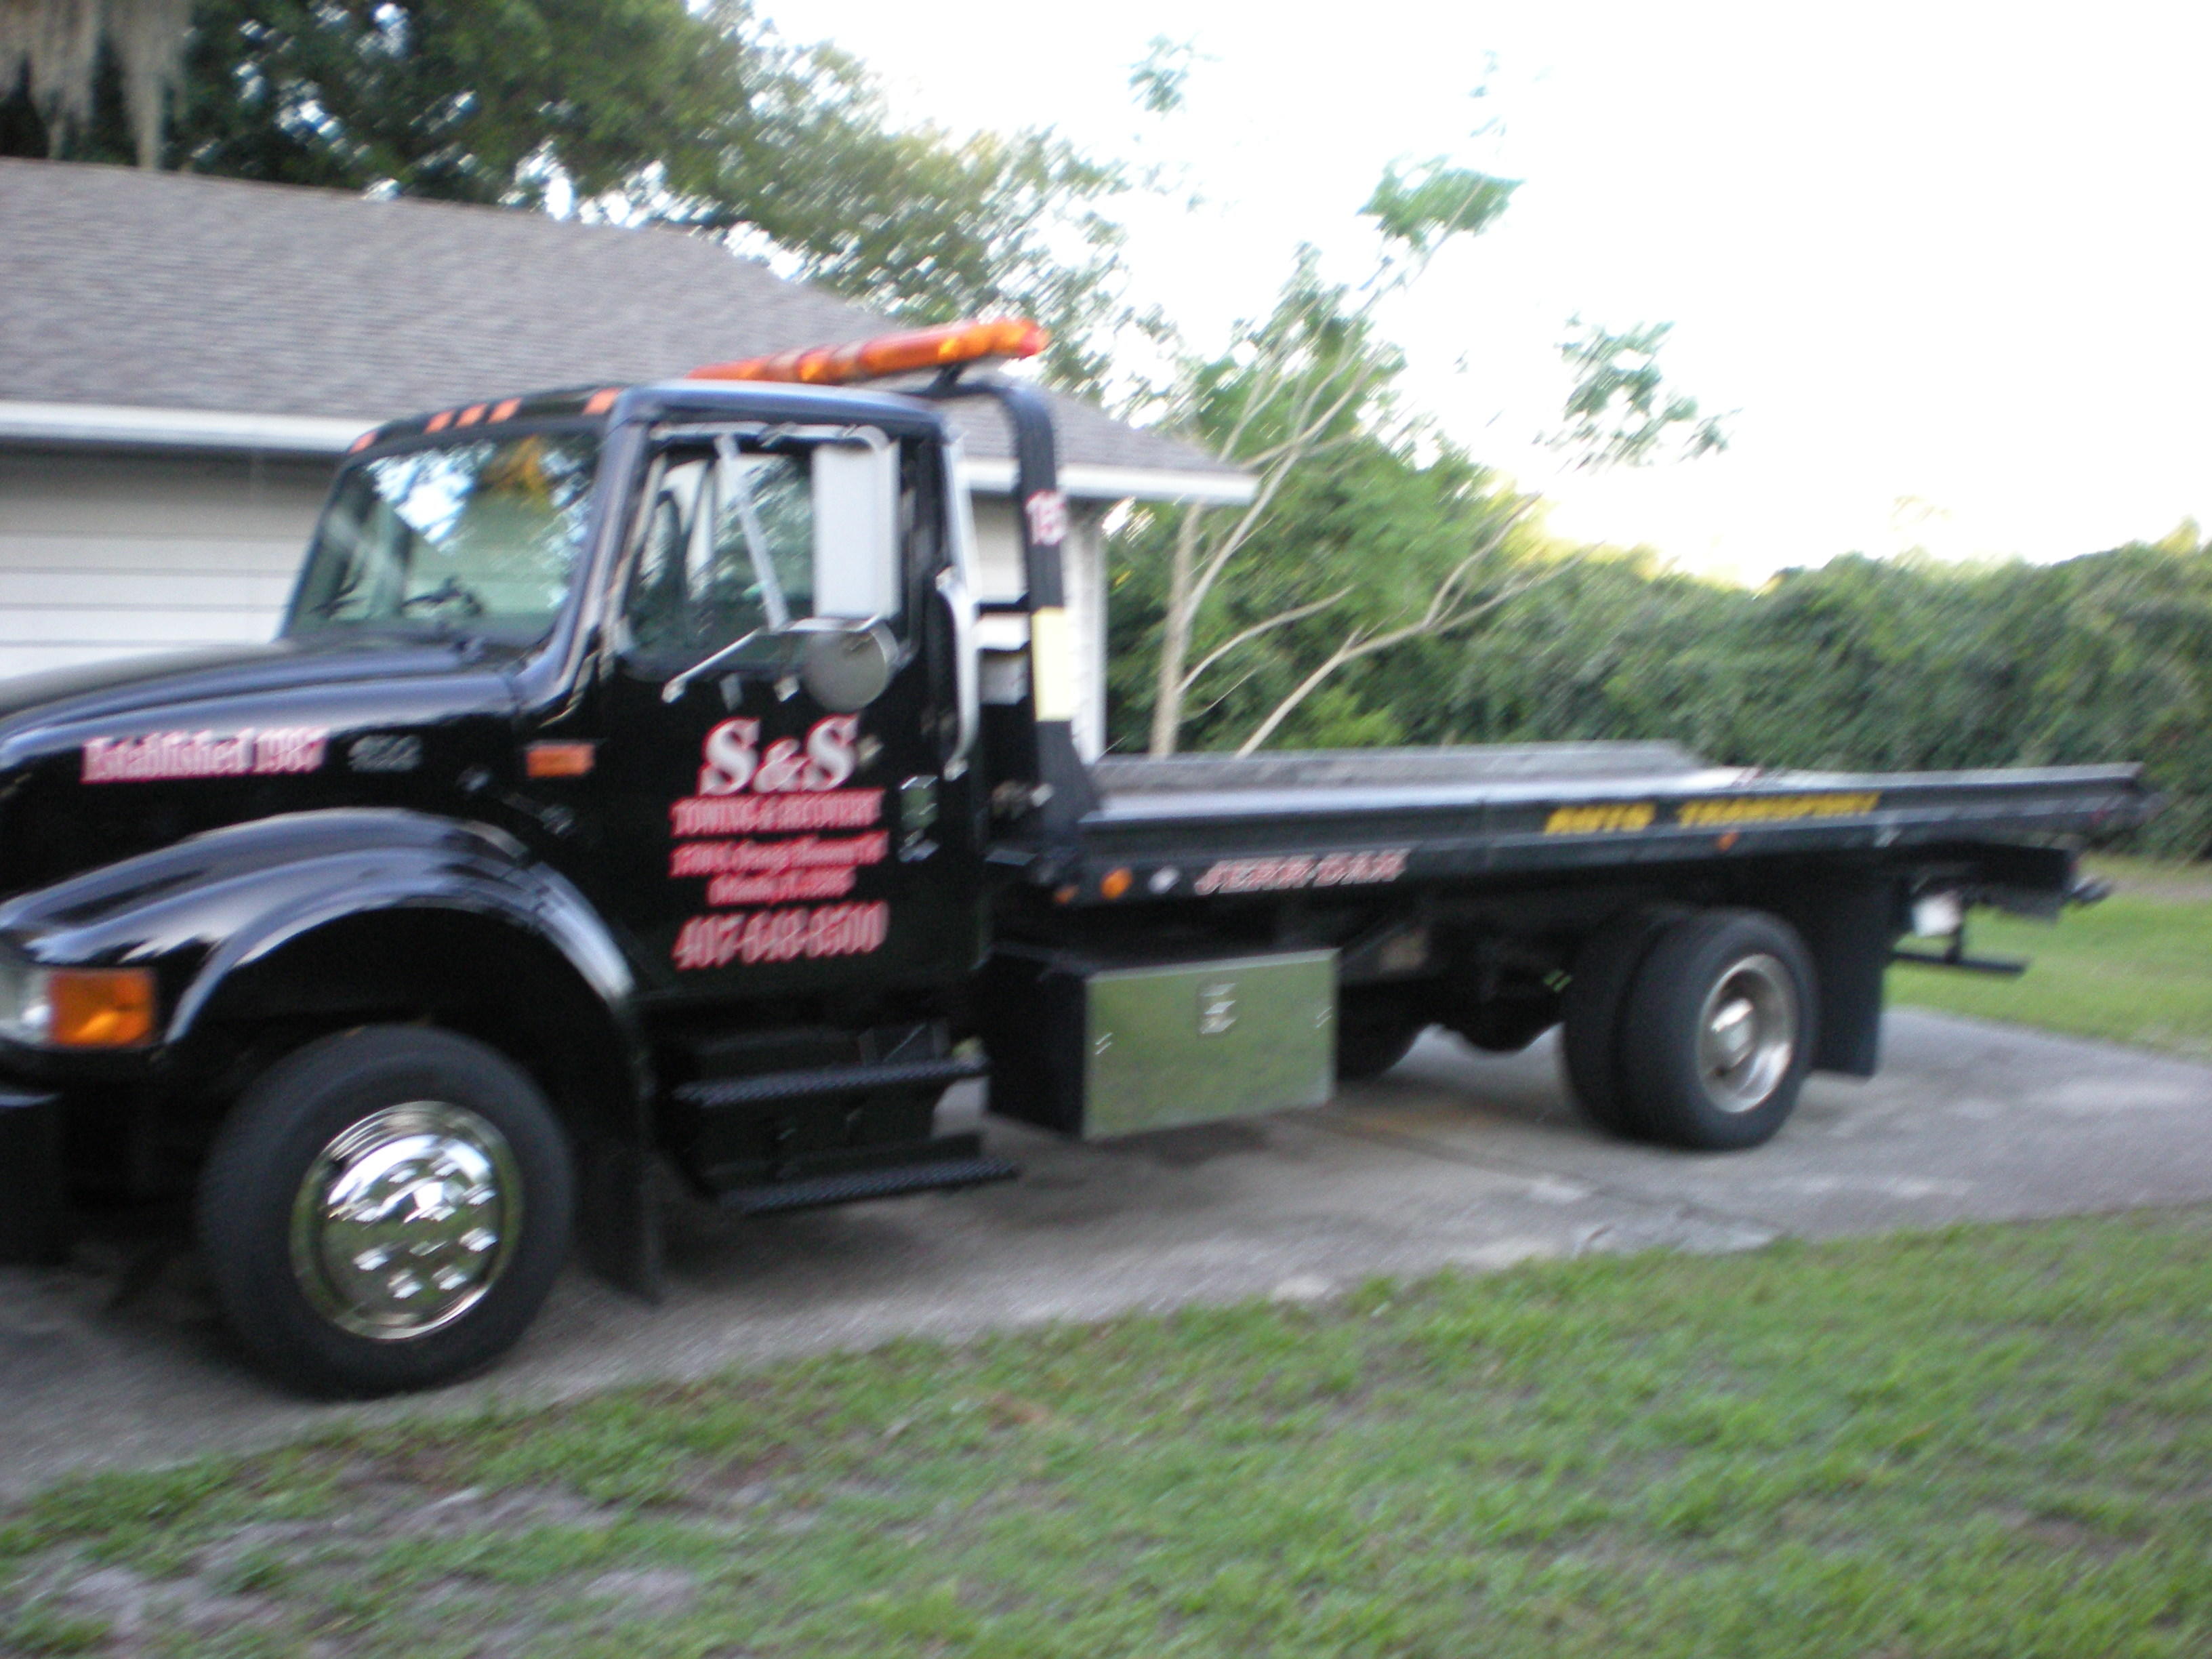 S & S Towing & Recovery Orlando (407)648-8500